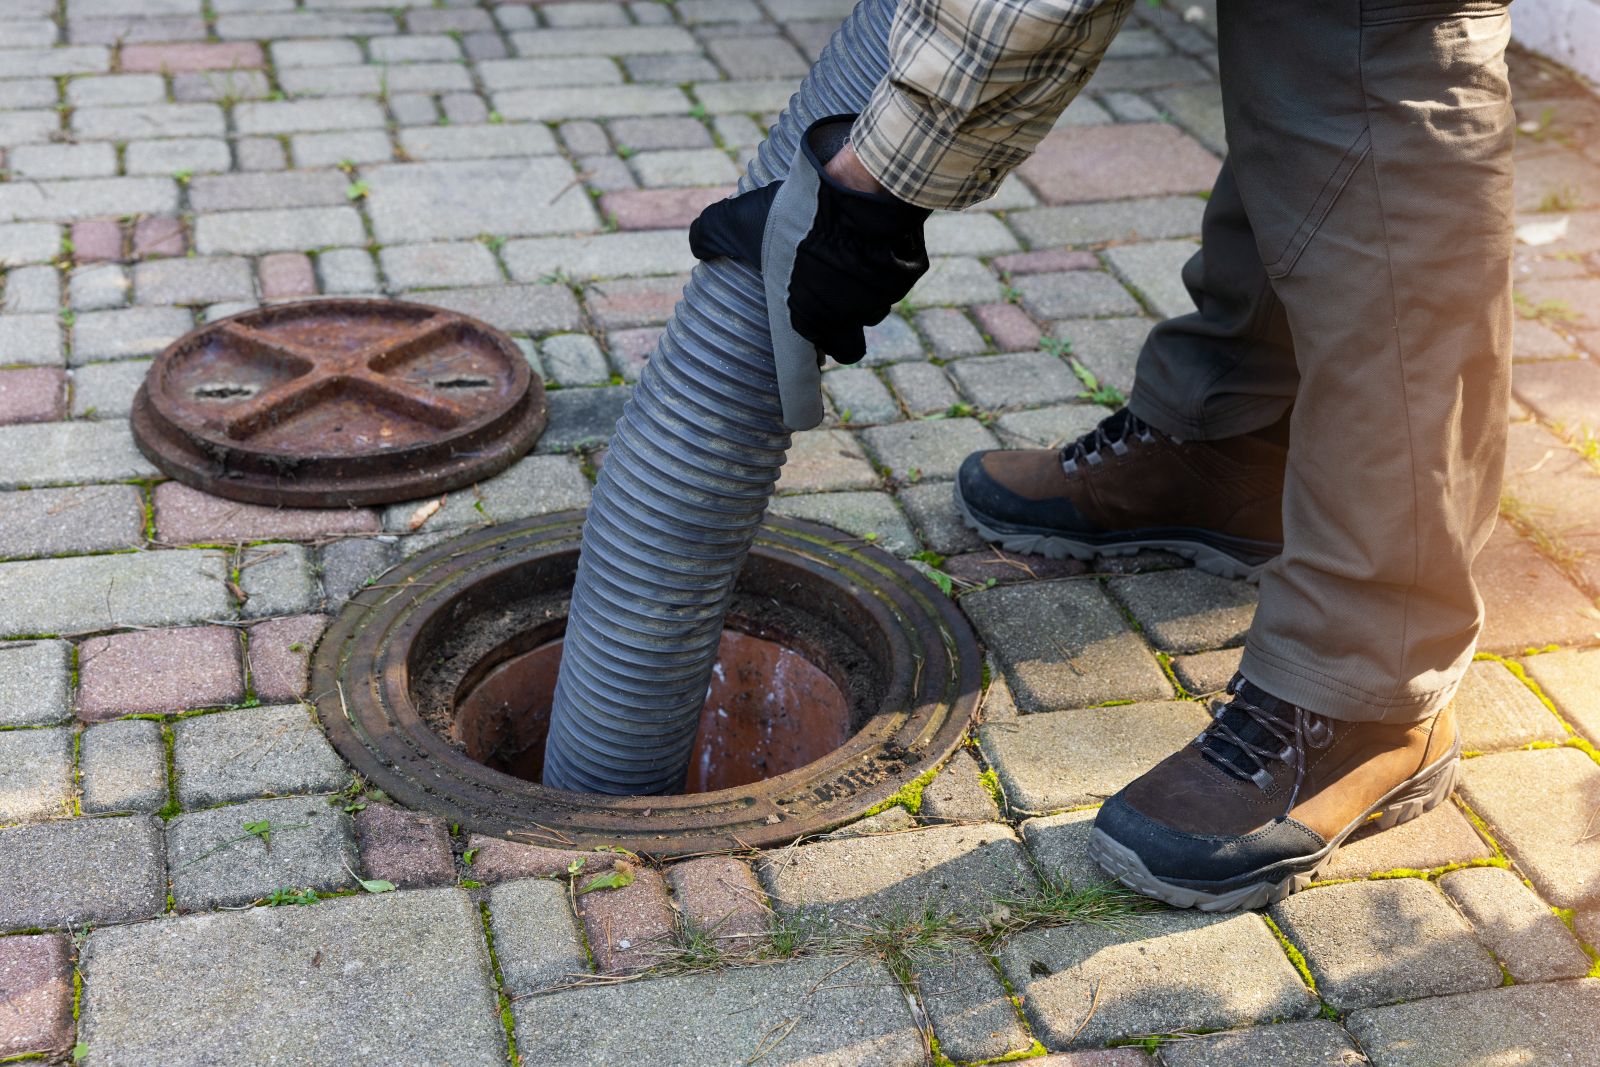 Sewage Damage Solutions: We'll Clean Up the Mess Safely